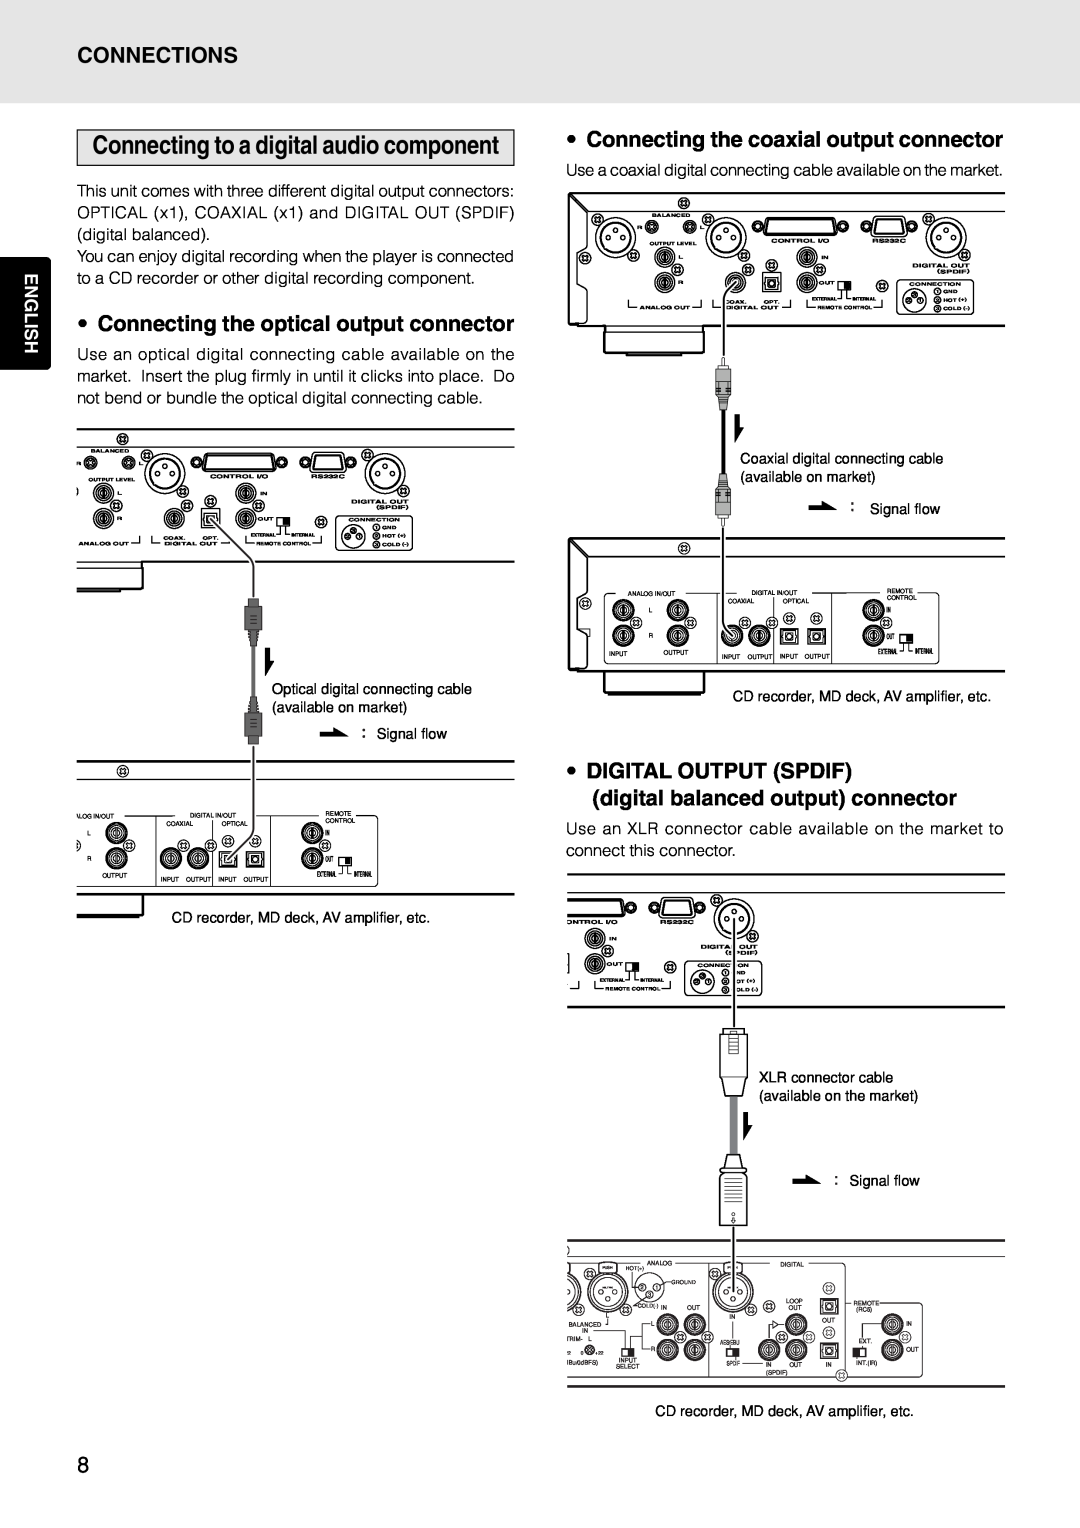 Marantz PMD325 manual Connections, • Connecting the optical output connector, •Connecting the coaxial output connector 